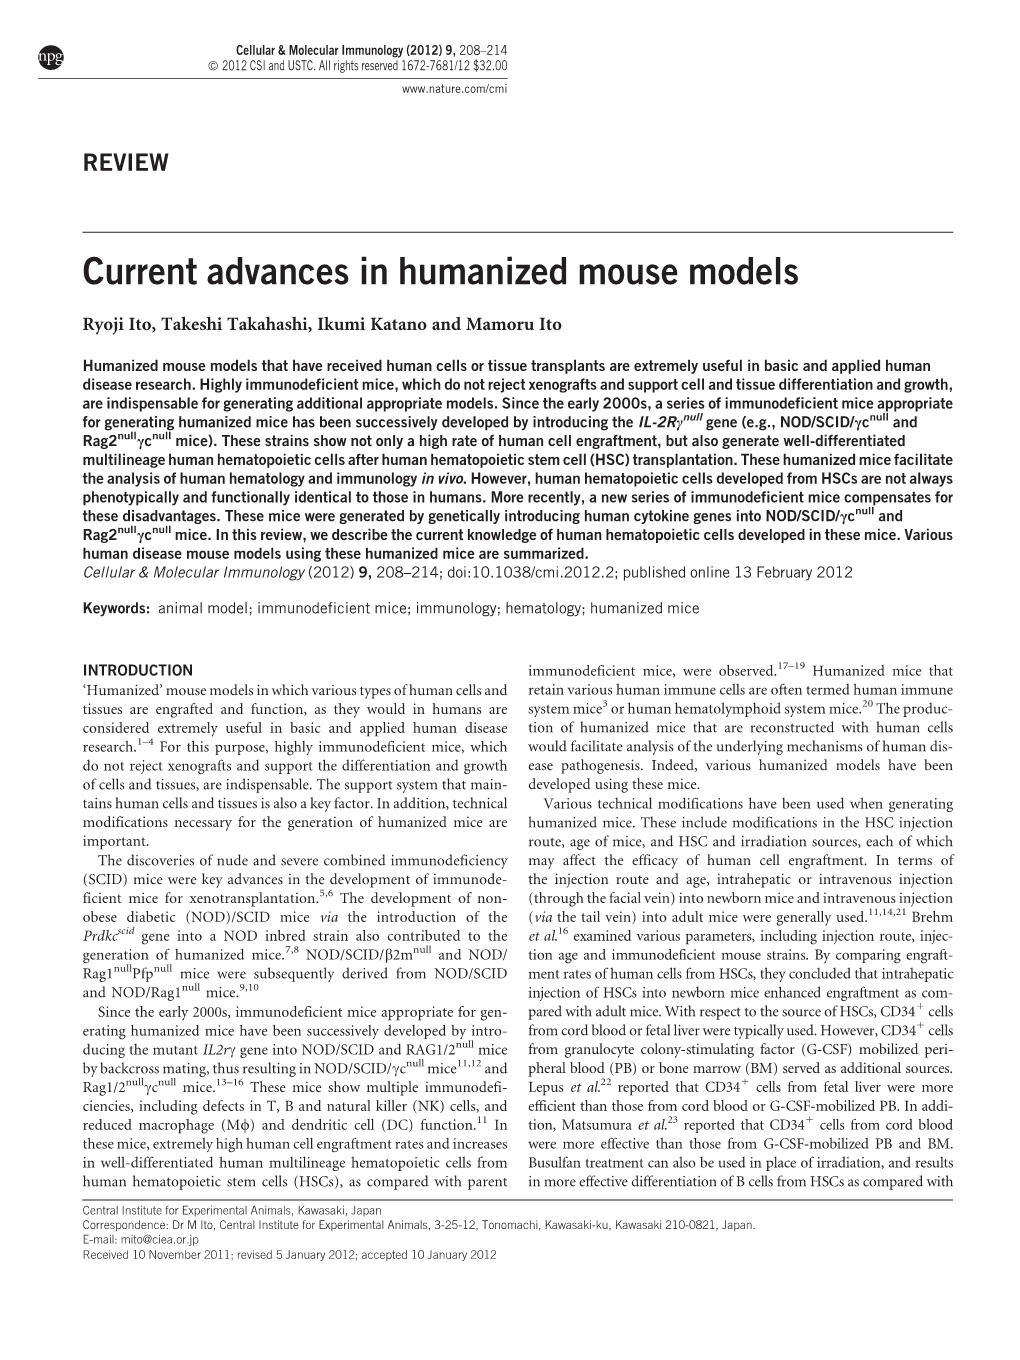 Current Advances in Humanized Mouse Models